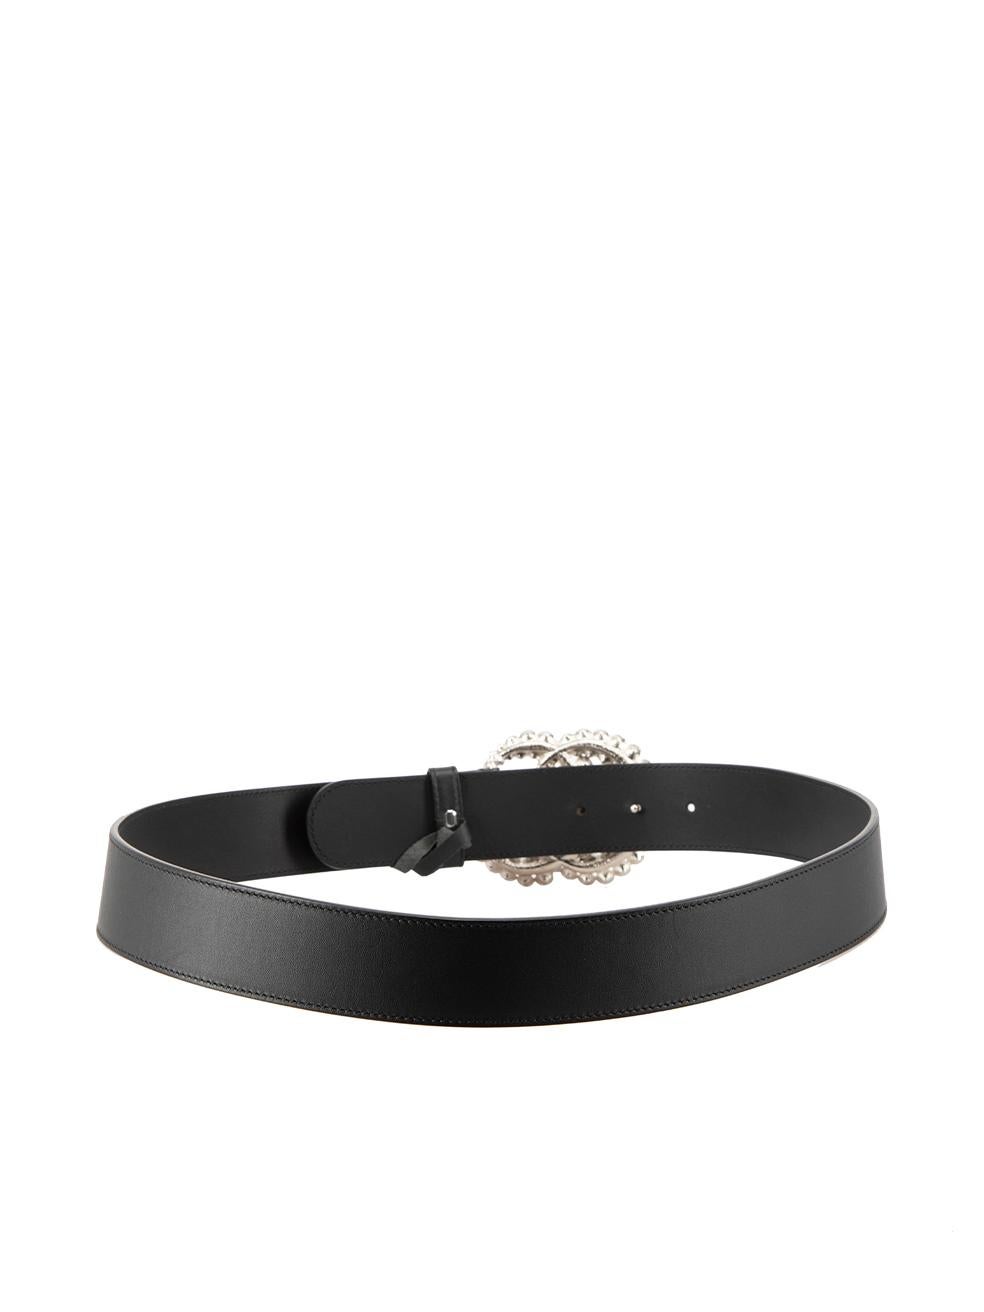 Women's Gucci Black Leather Silver Crystal GG Buckle Belt